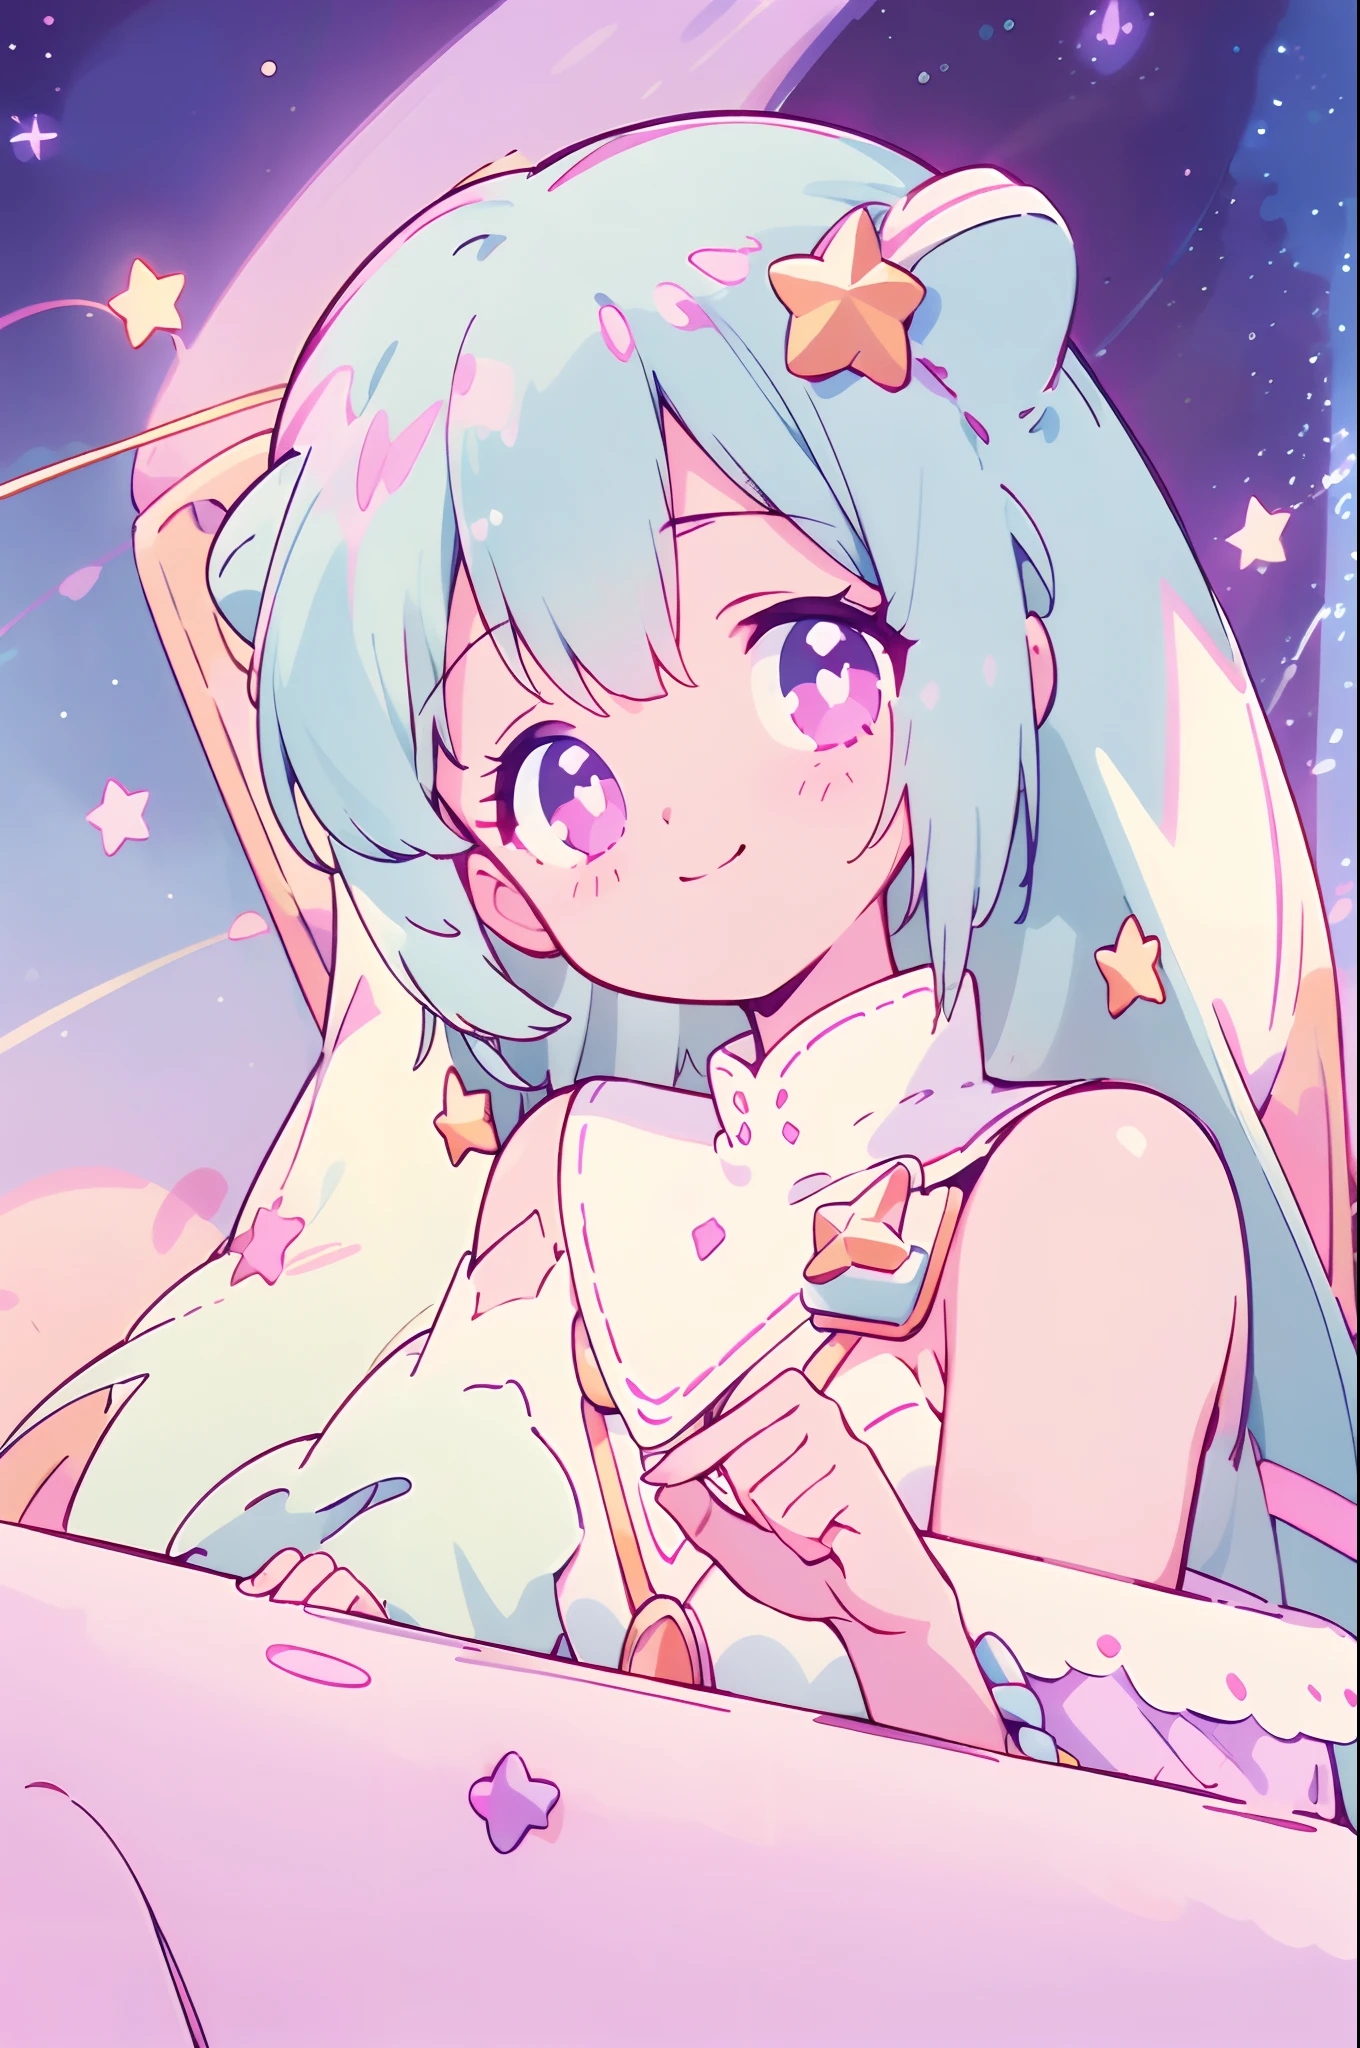 (1girl),(pop style,flat colors,star pattern,pastel,shiny eyes,smile,space vibe,colored lineart,outline,simple,night background, closeup,pastel night aethestic),((masterpiece))